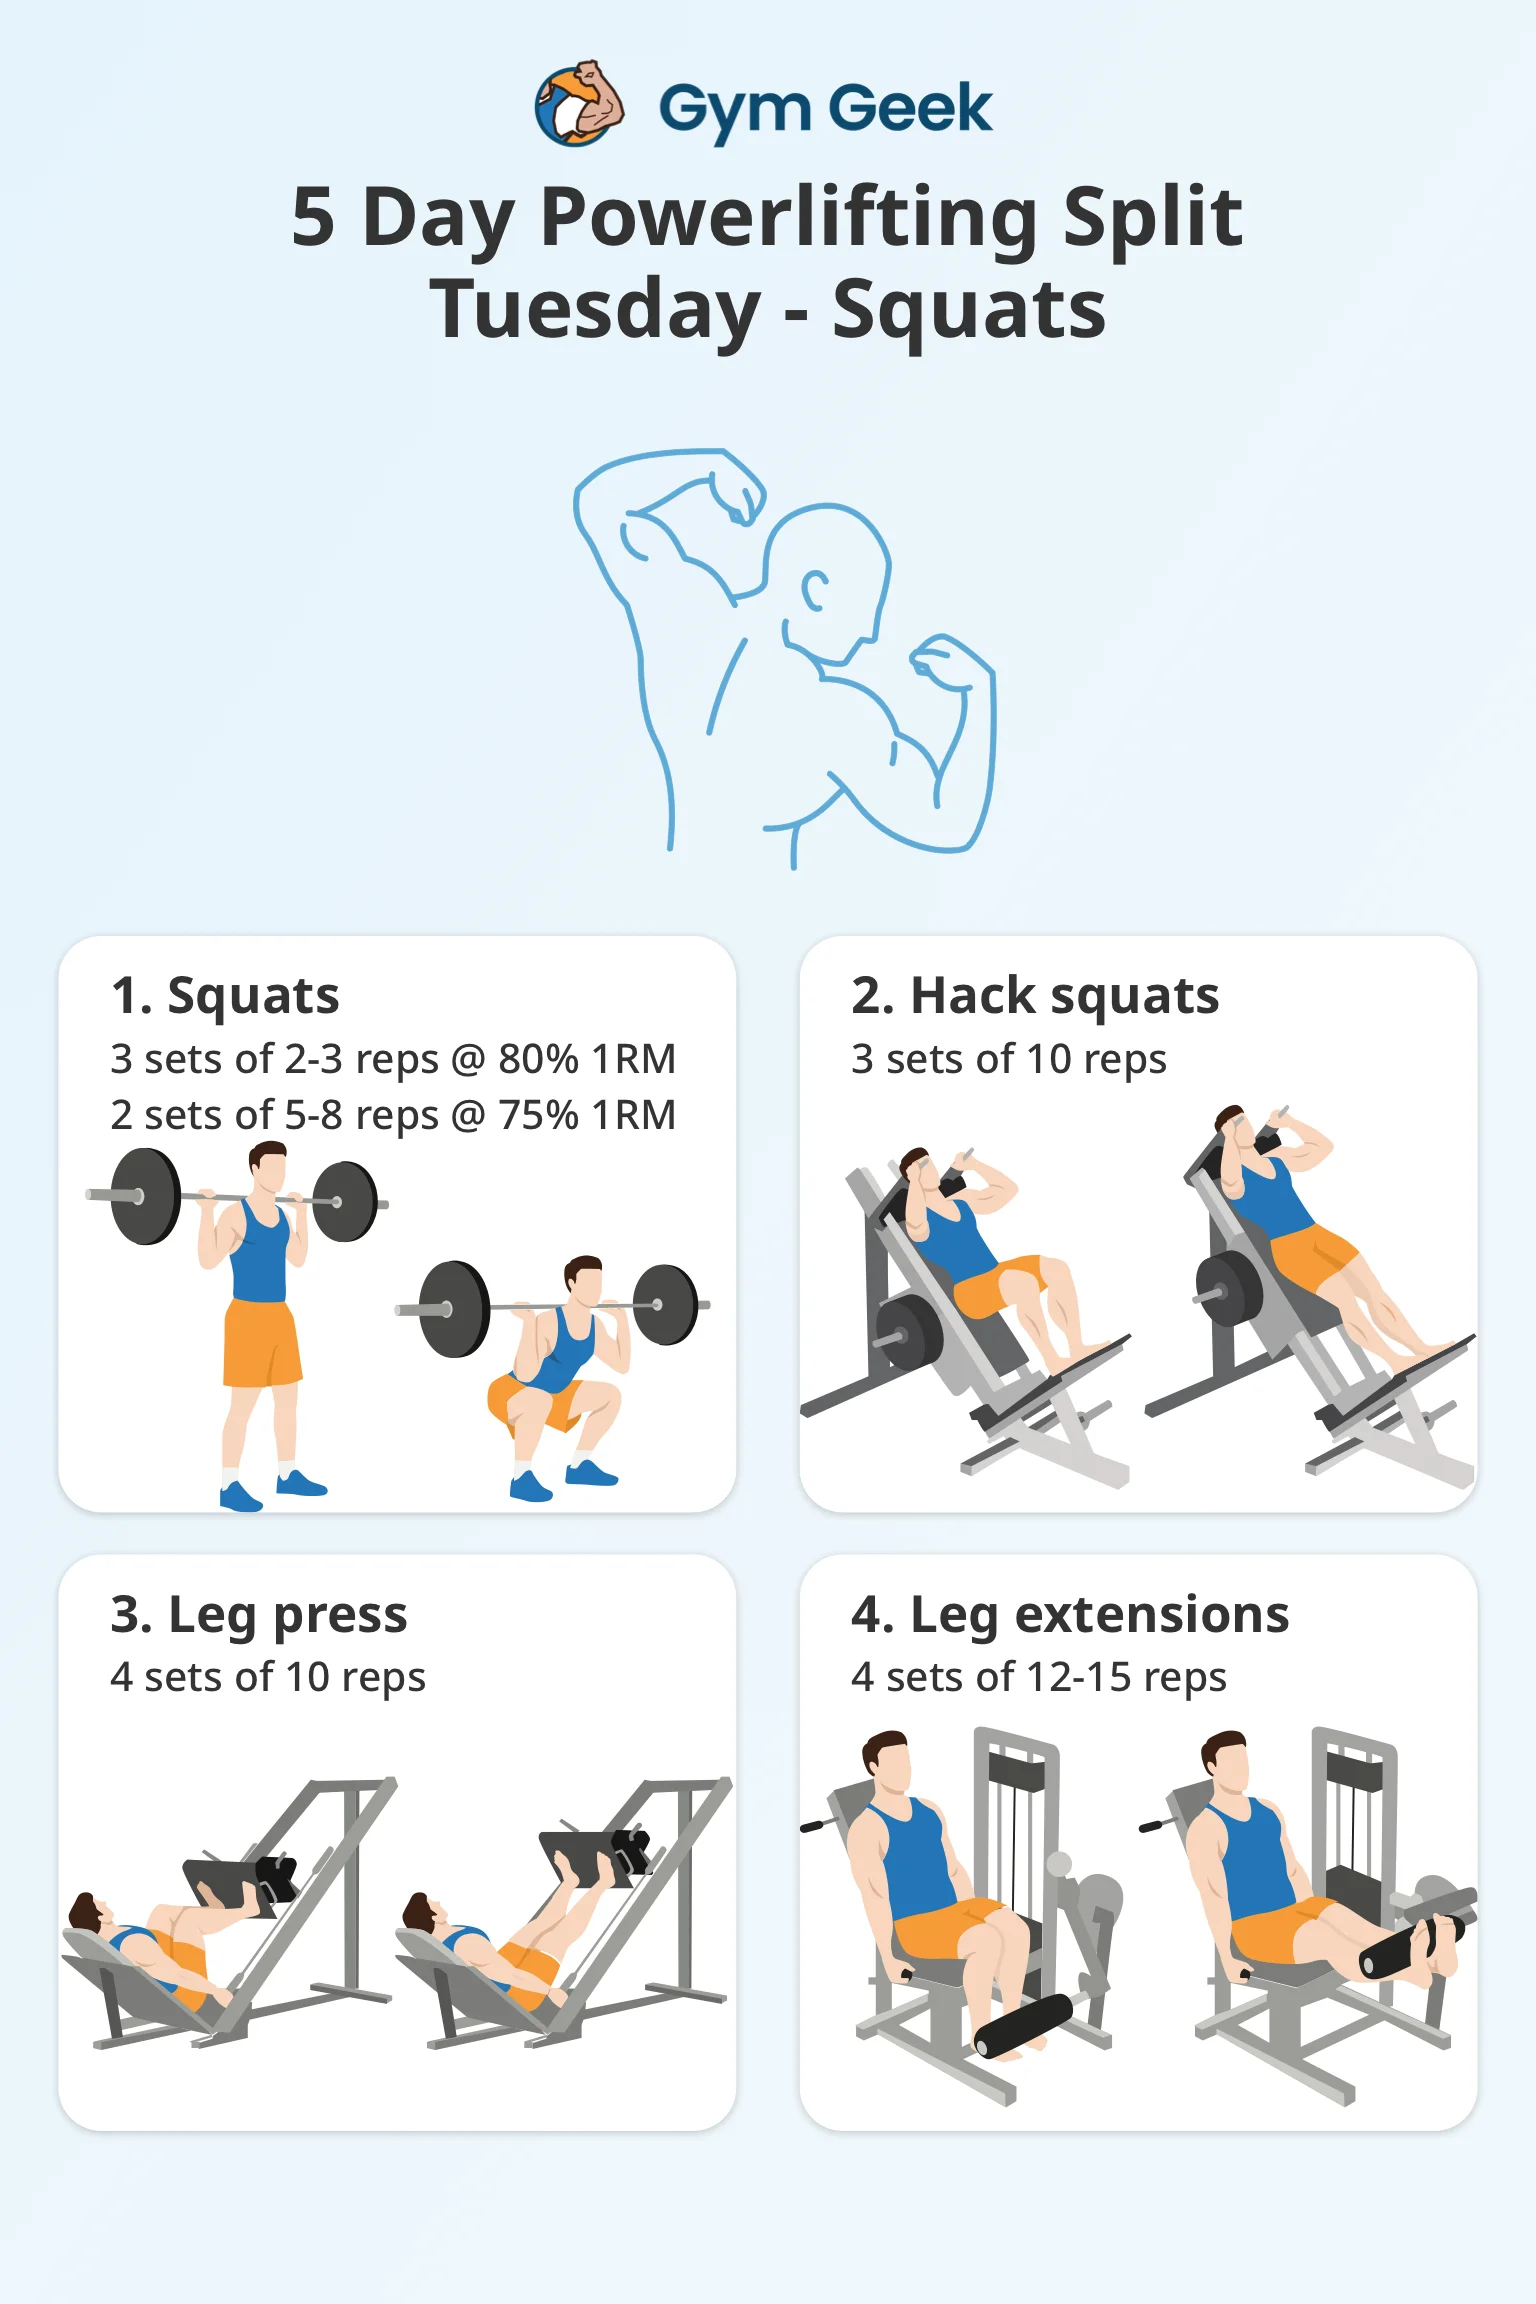 infographic - 5 day powerlifting program - Tuesday (Squats day)